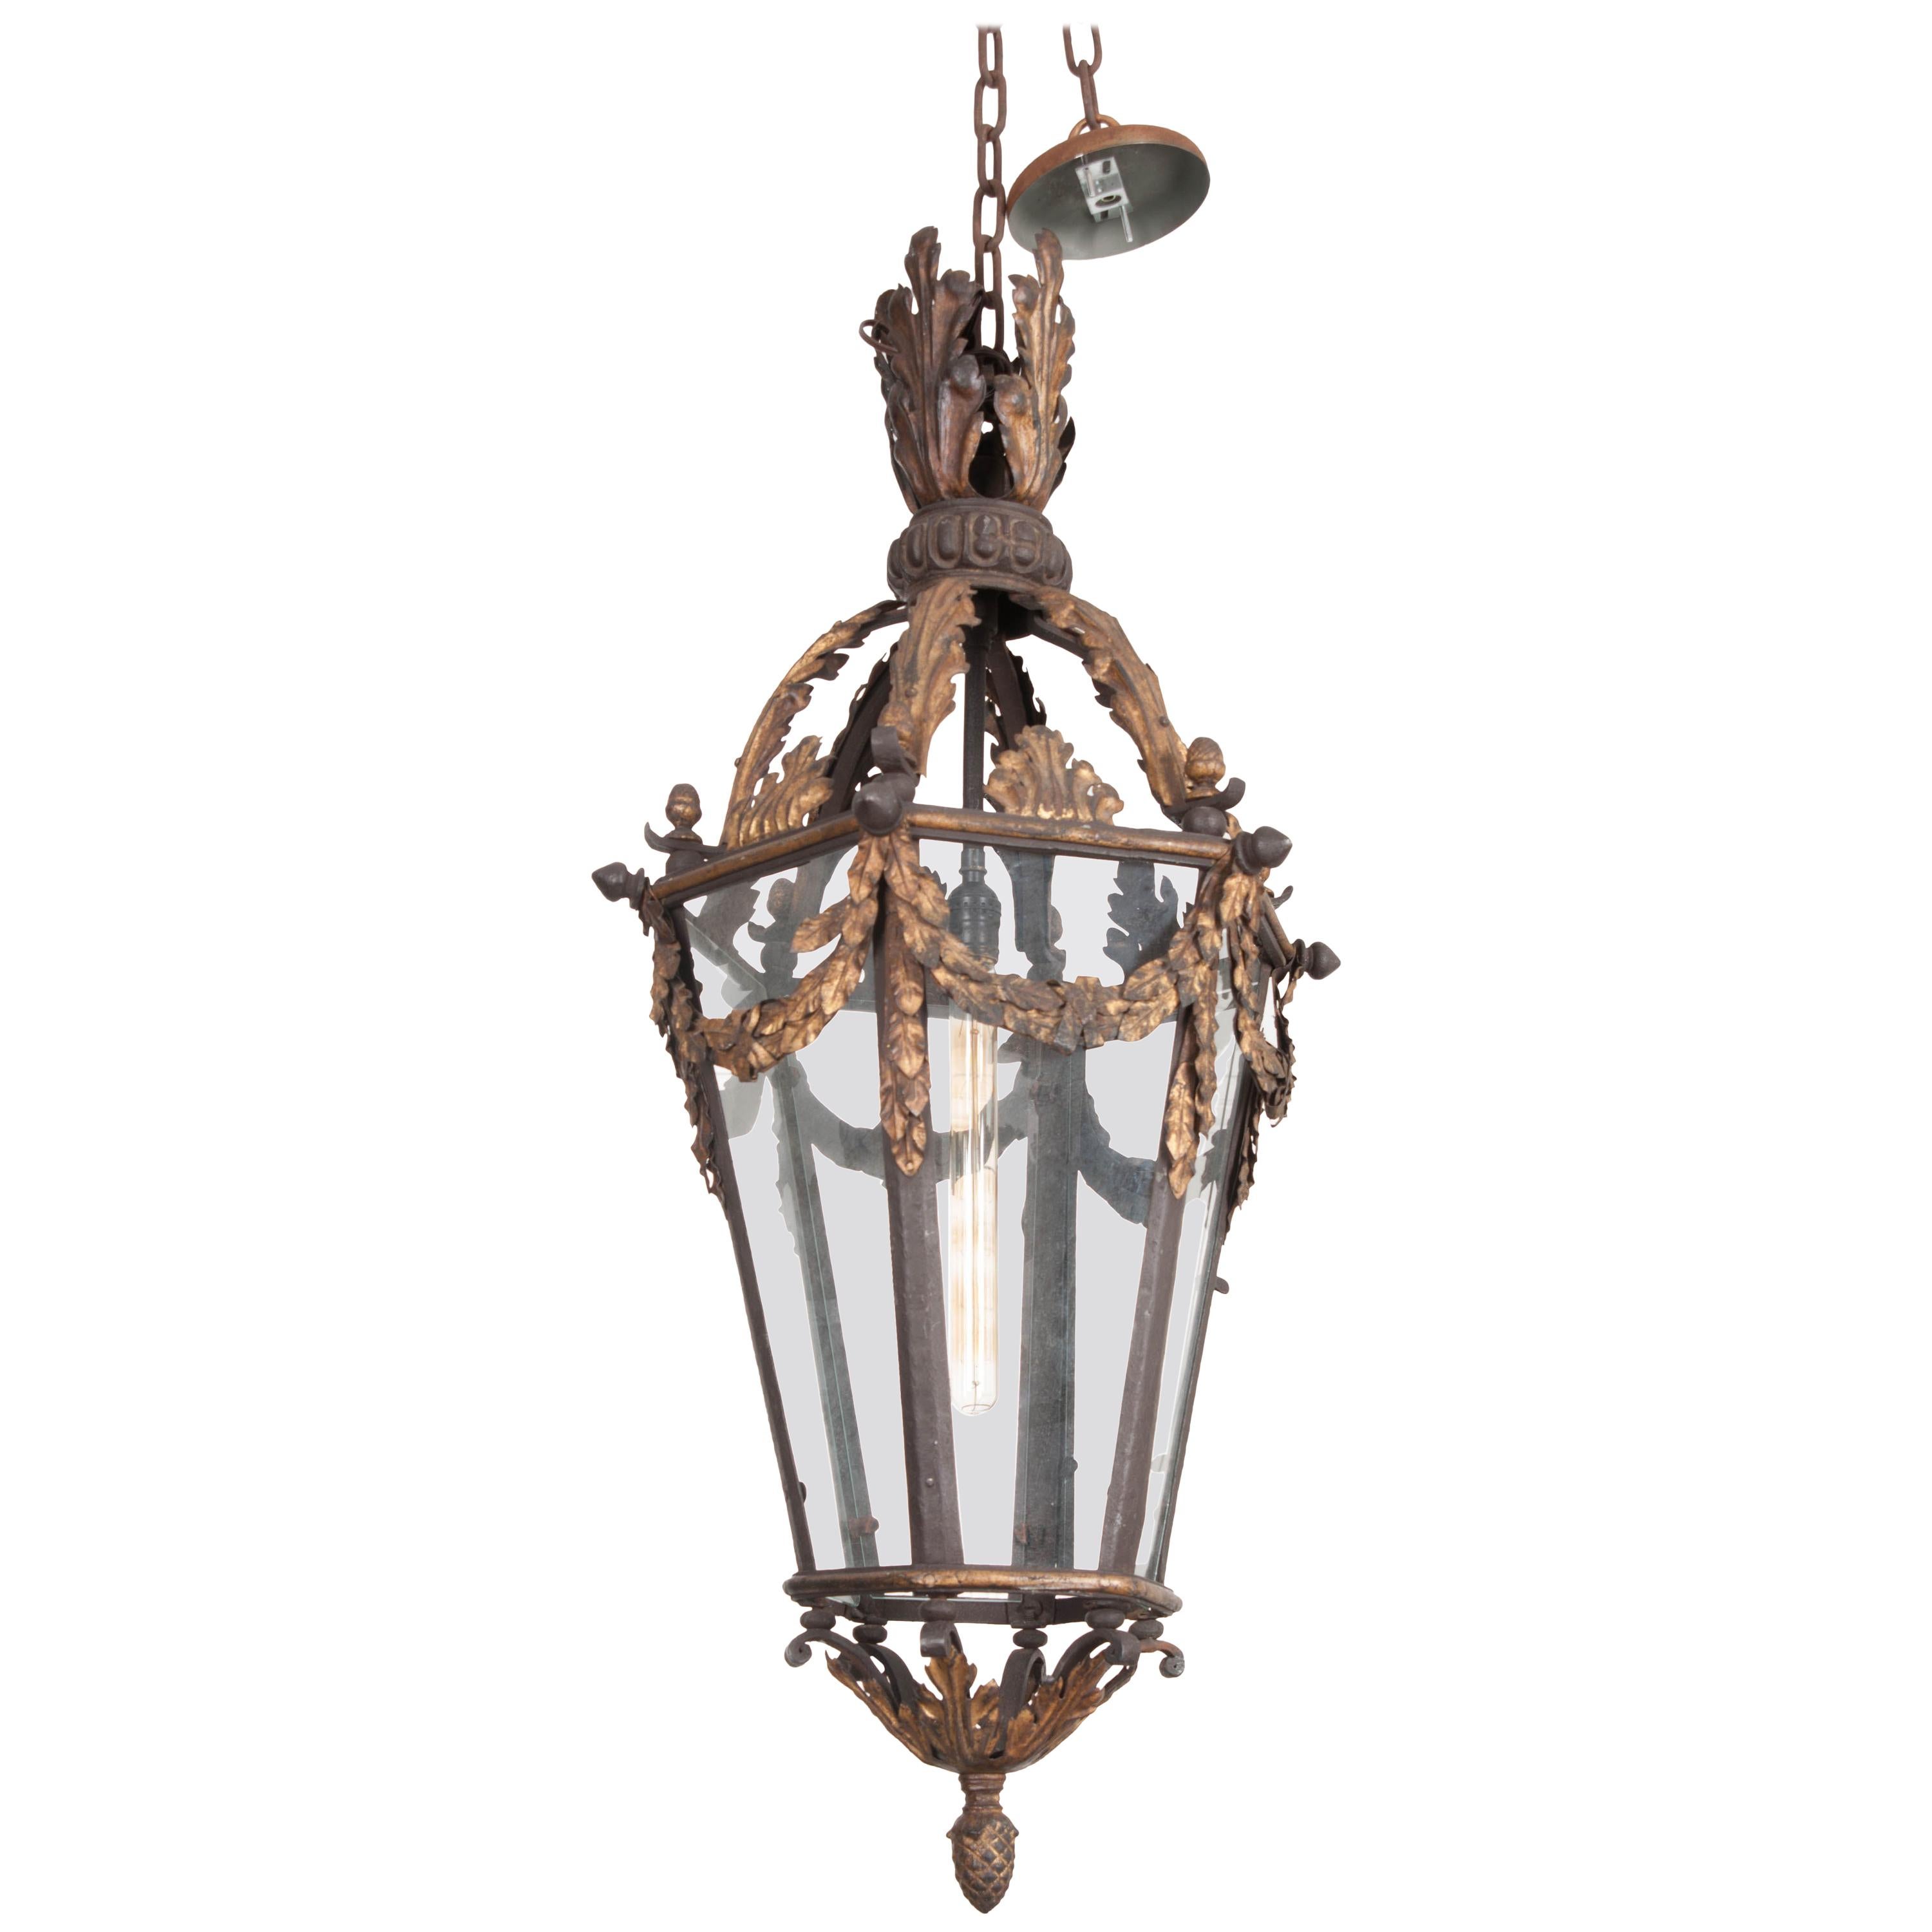 French 19th Century Iron and Gilt-Brass Single-Light Lantern For Sale